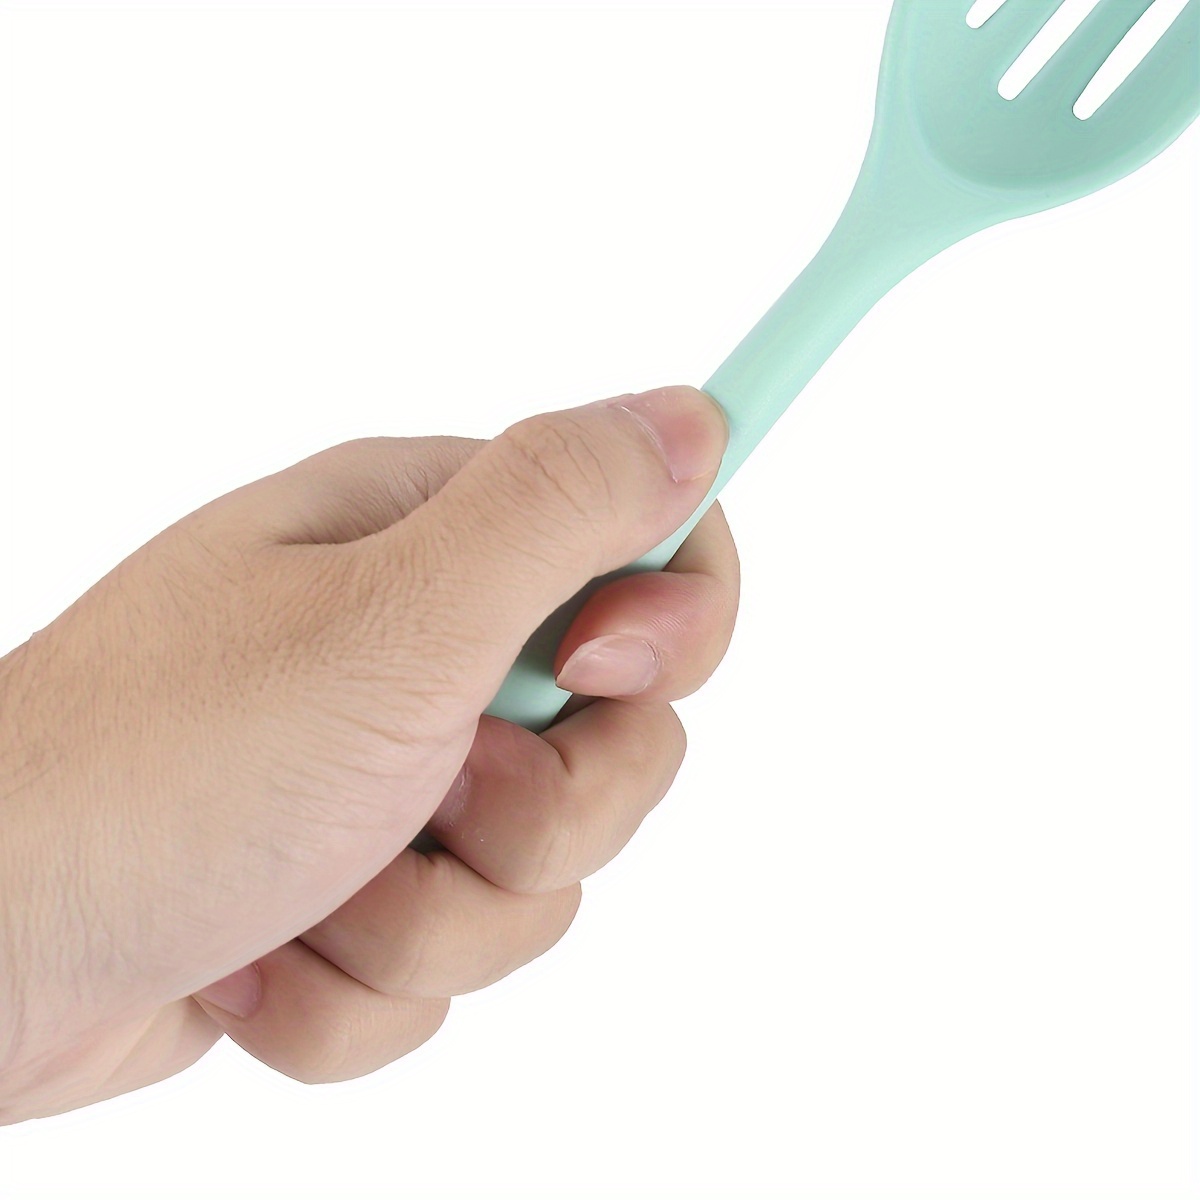 Silicone Spoon, Mixing Spoon, Salad Spoon, Kitchen Spoon For